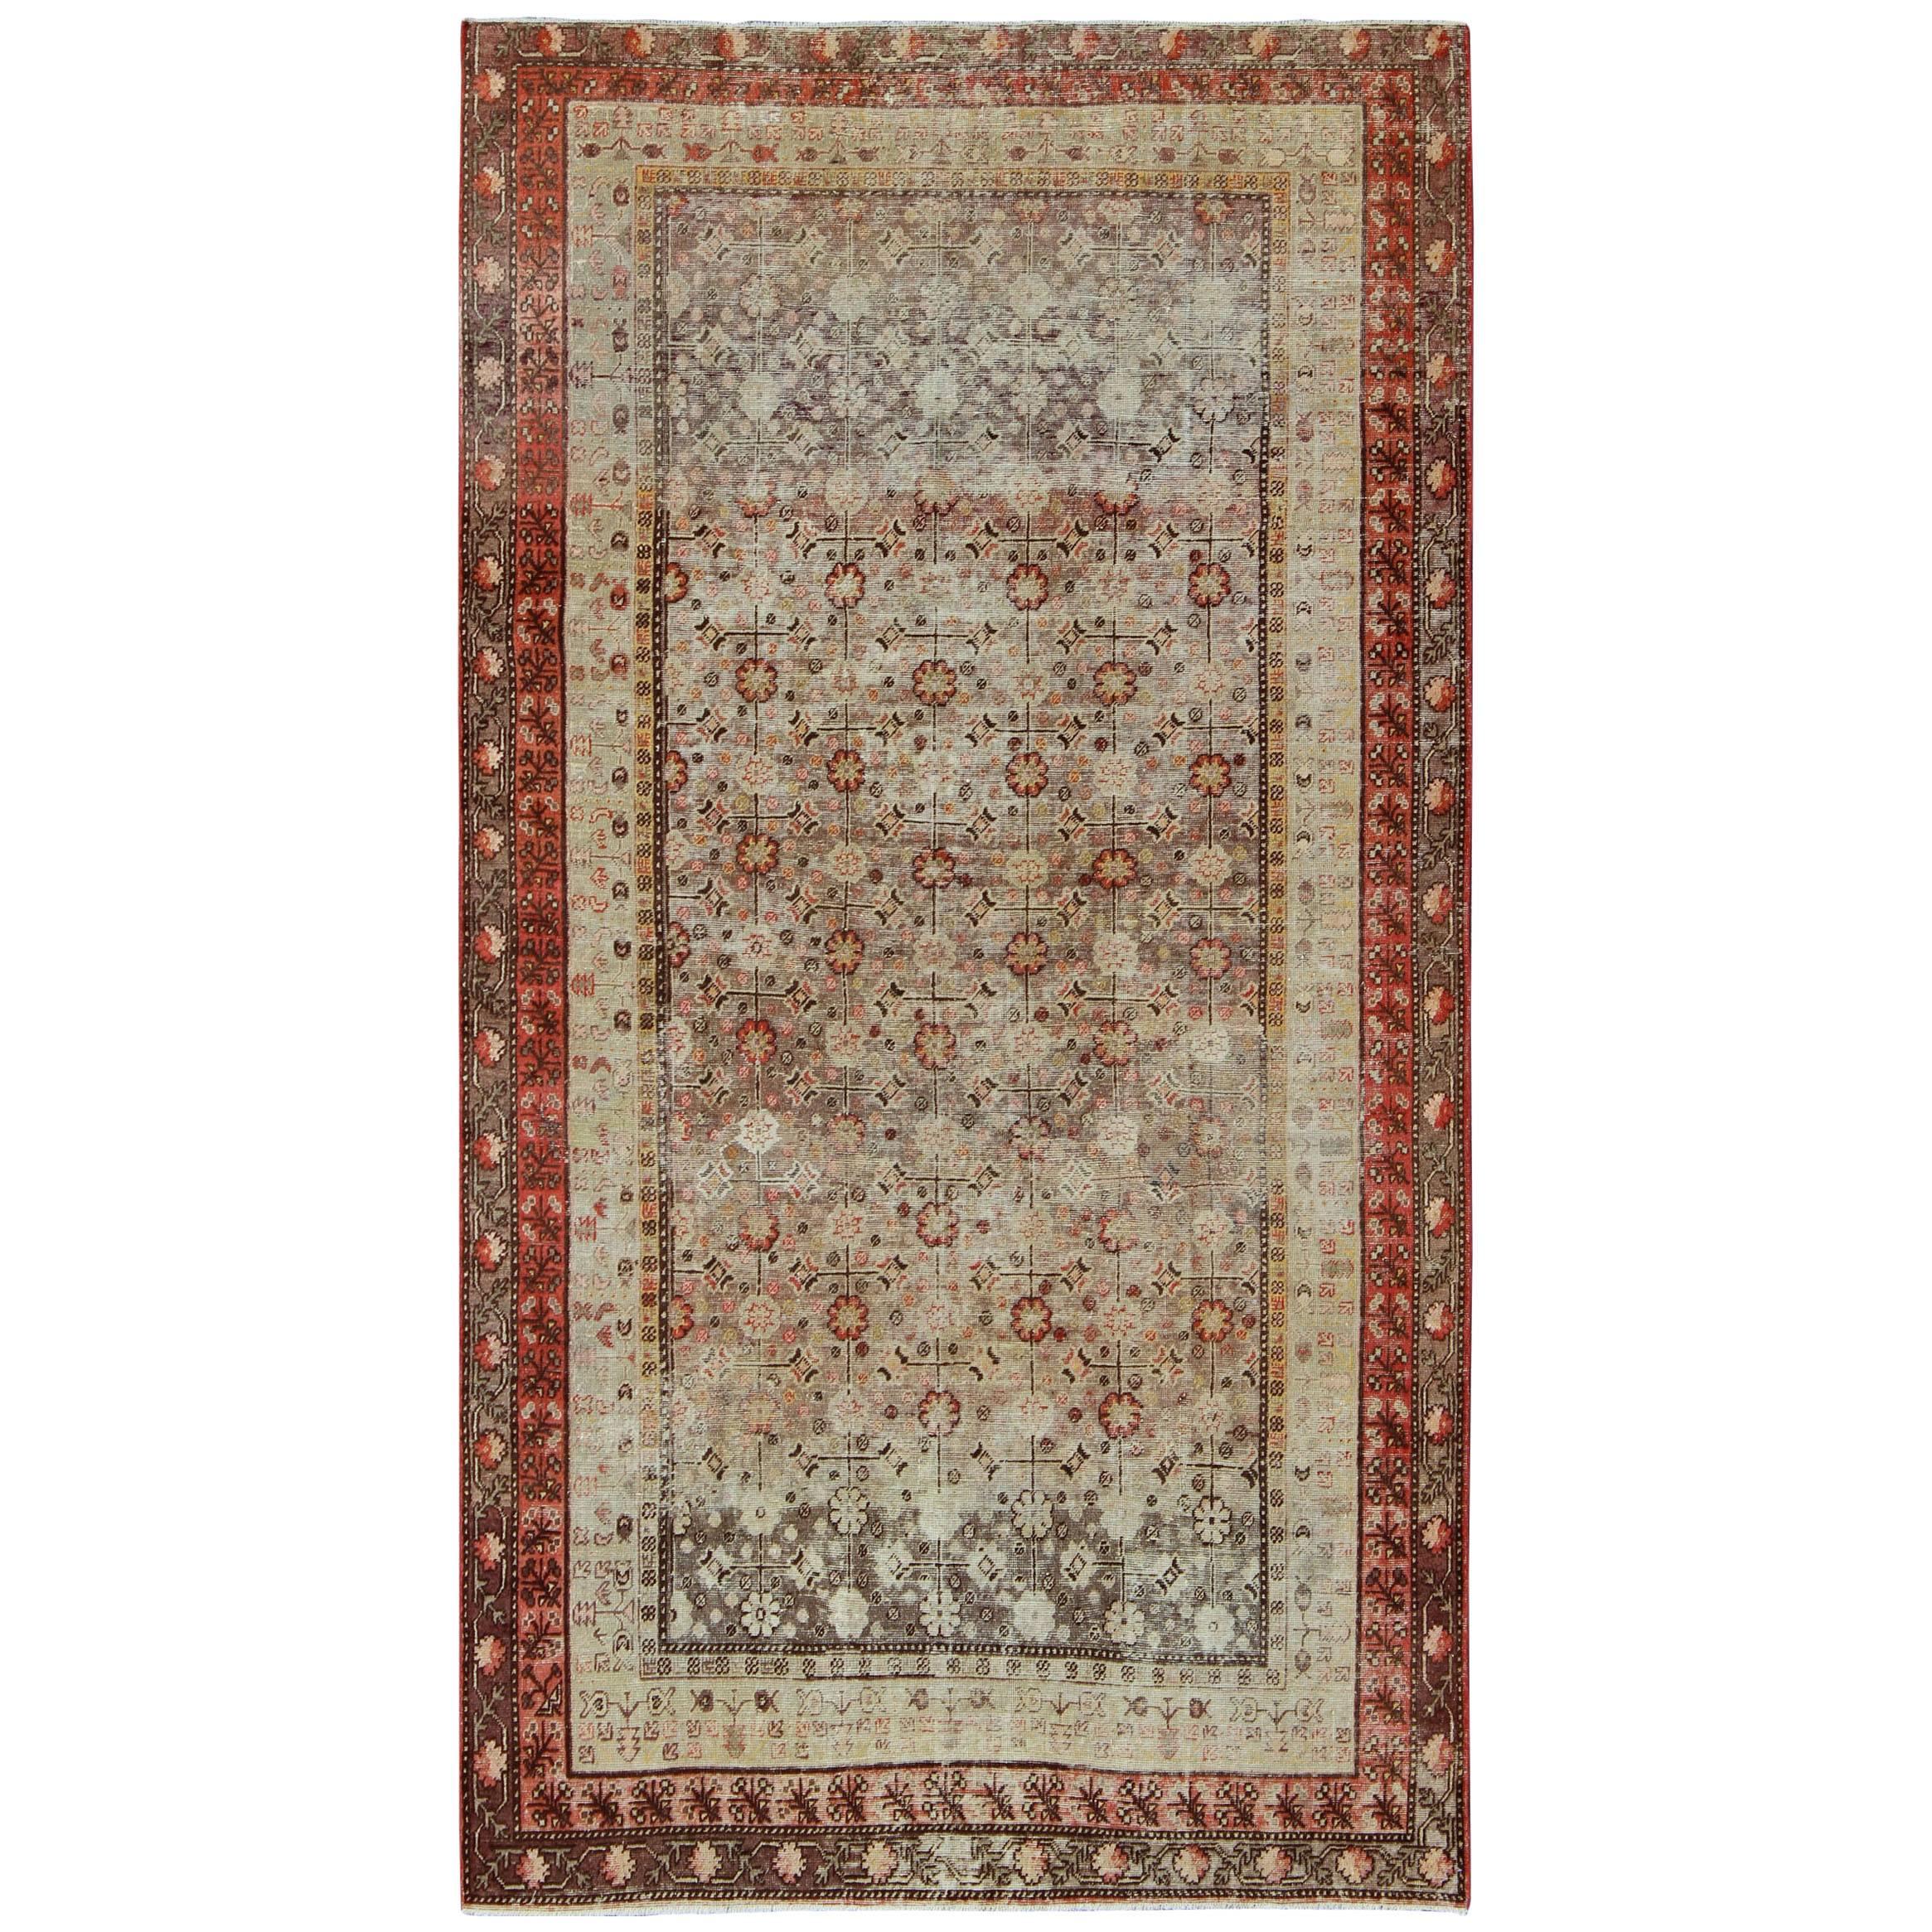 Exquisite Antique Khotan Rug with Intricate All-Over Sub-Geometric Floral Design For Sale